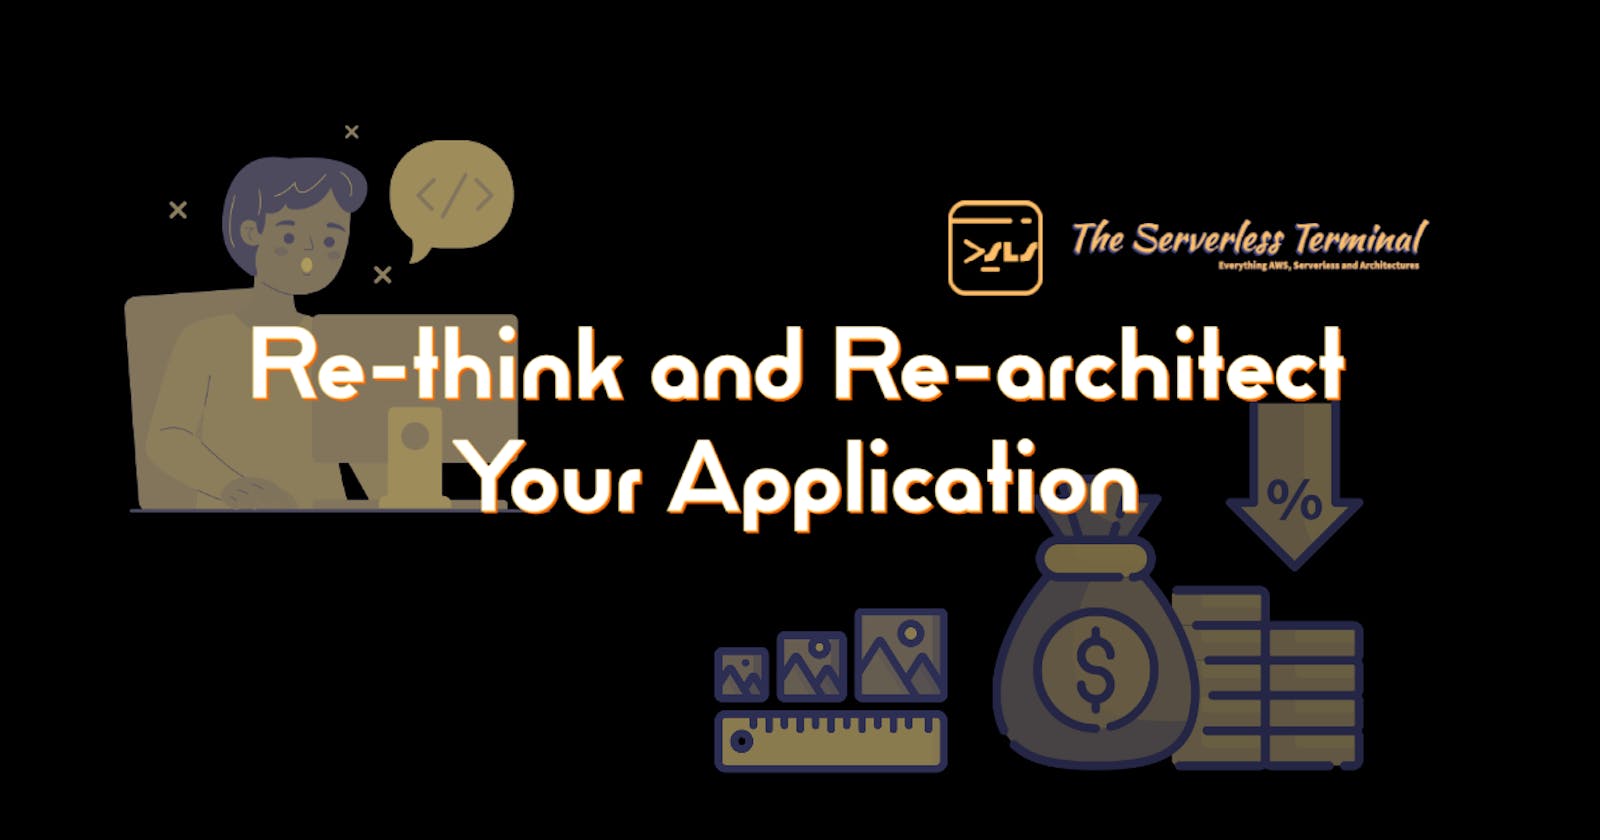 Re-think and Re-architect Your Application